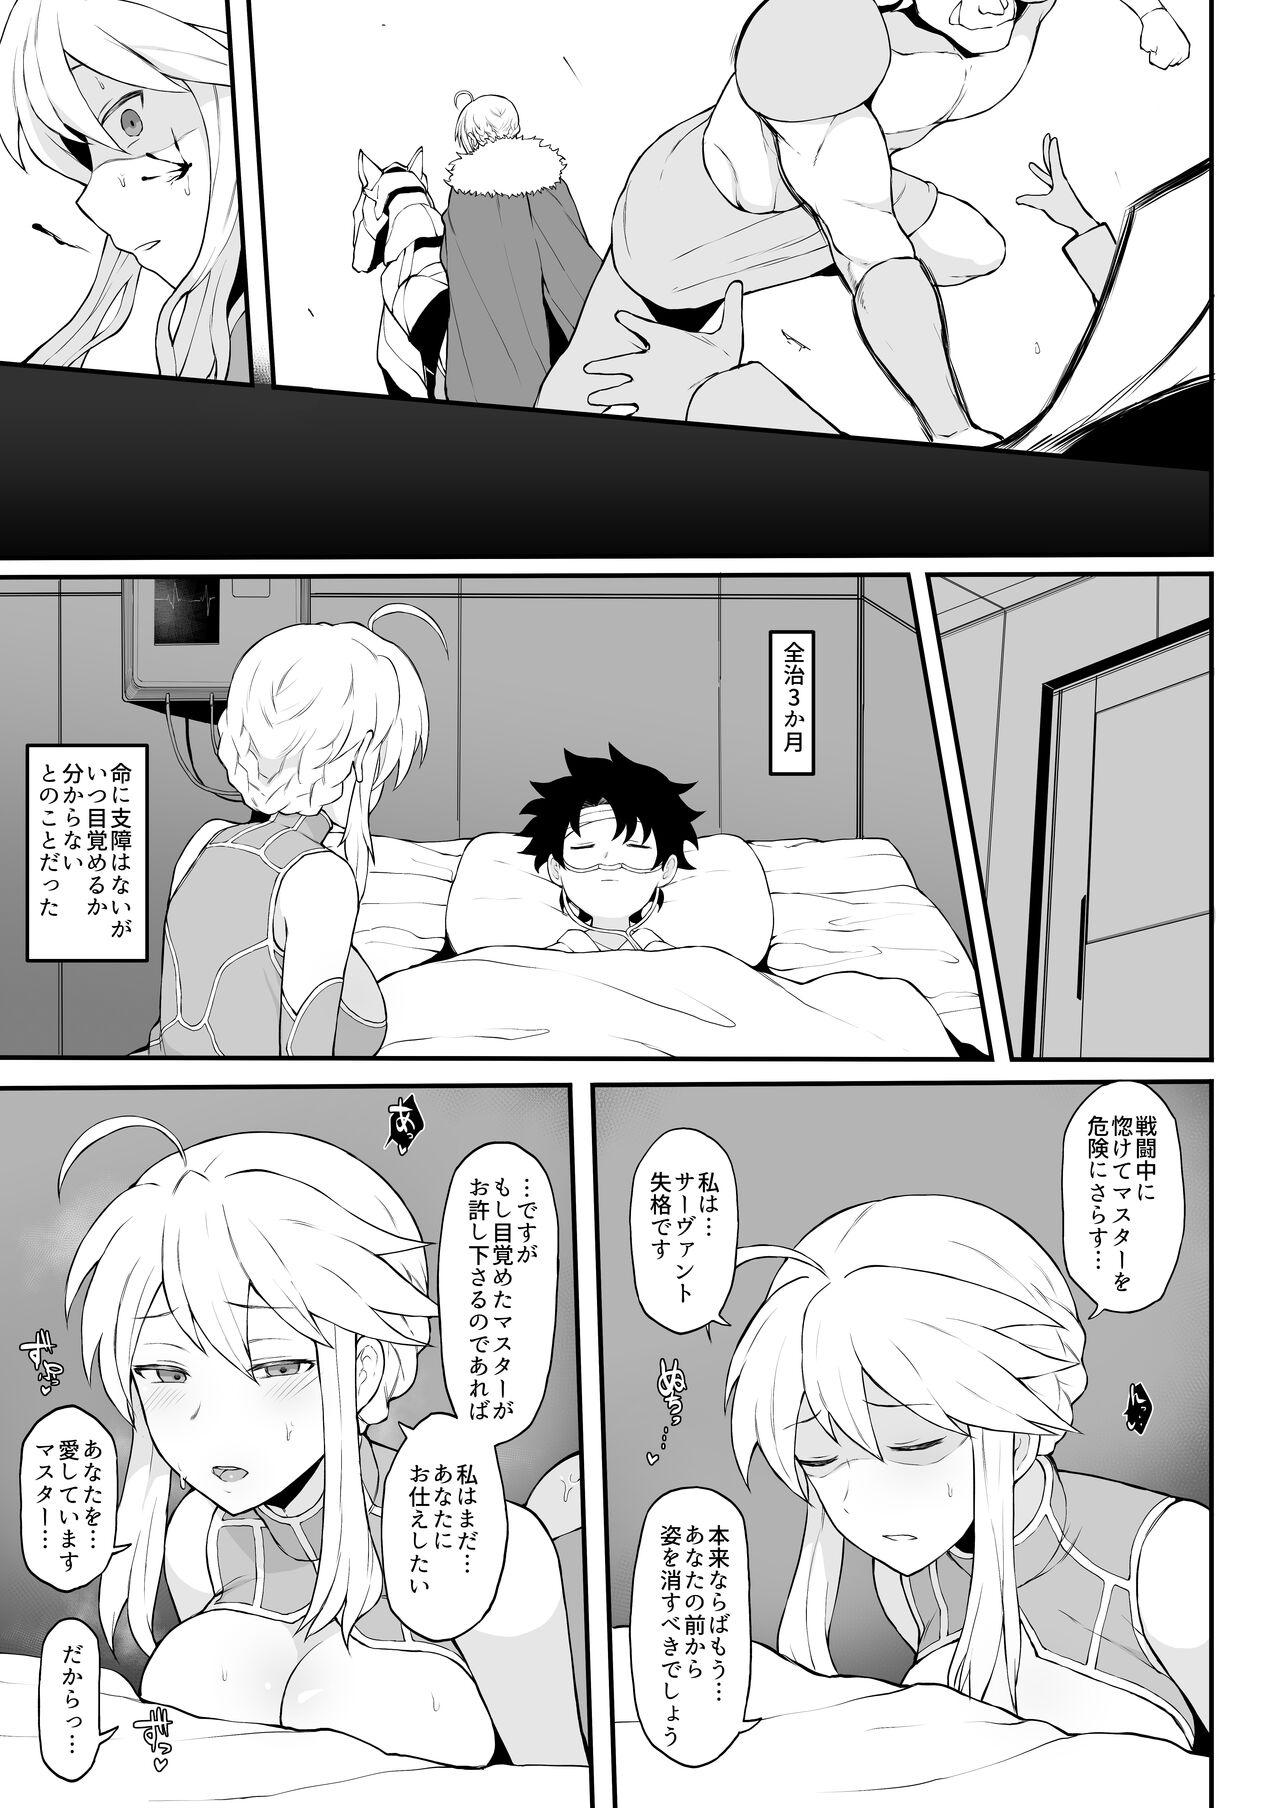 Gay Hunks No Title - Fate grand order Load - Page 11